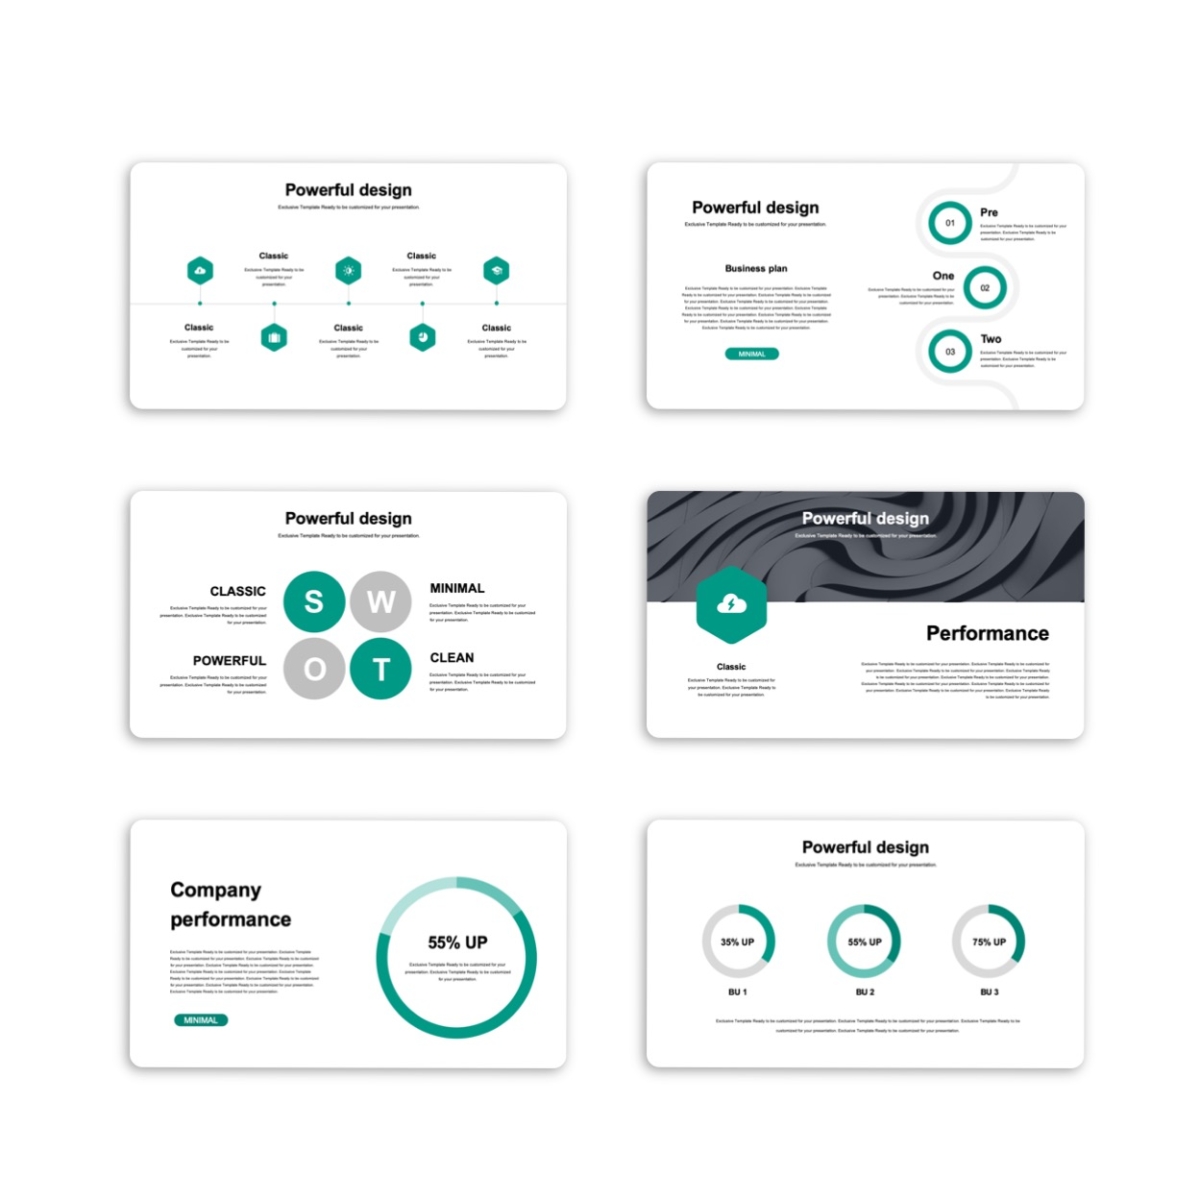 Google Slides-Business Analysis & Project Report Presentation Template